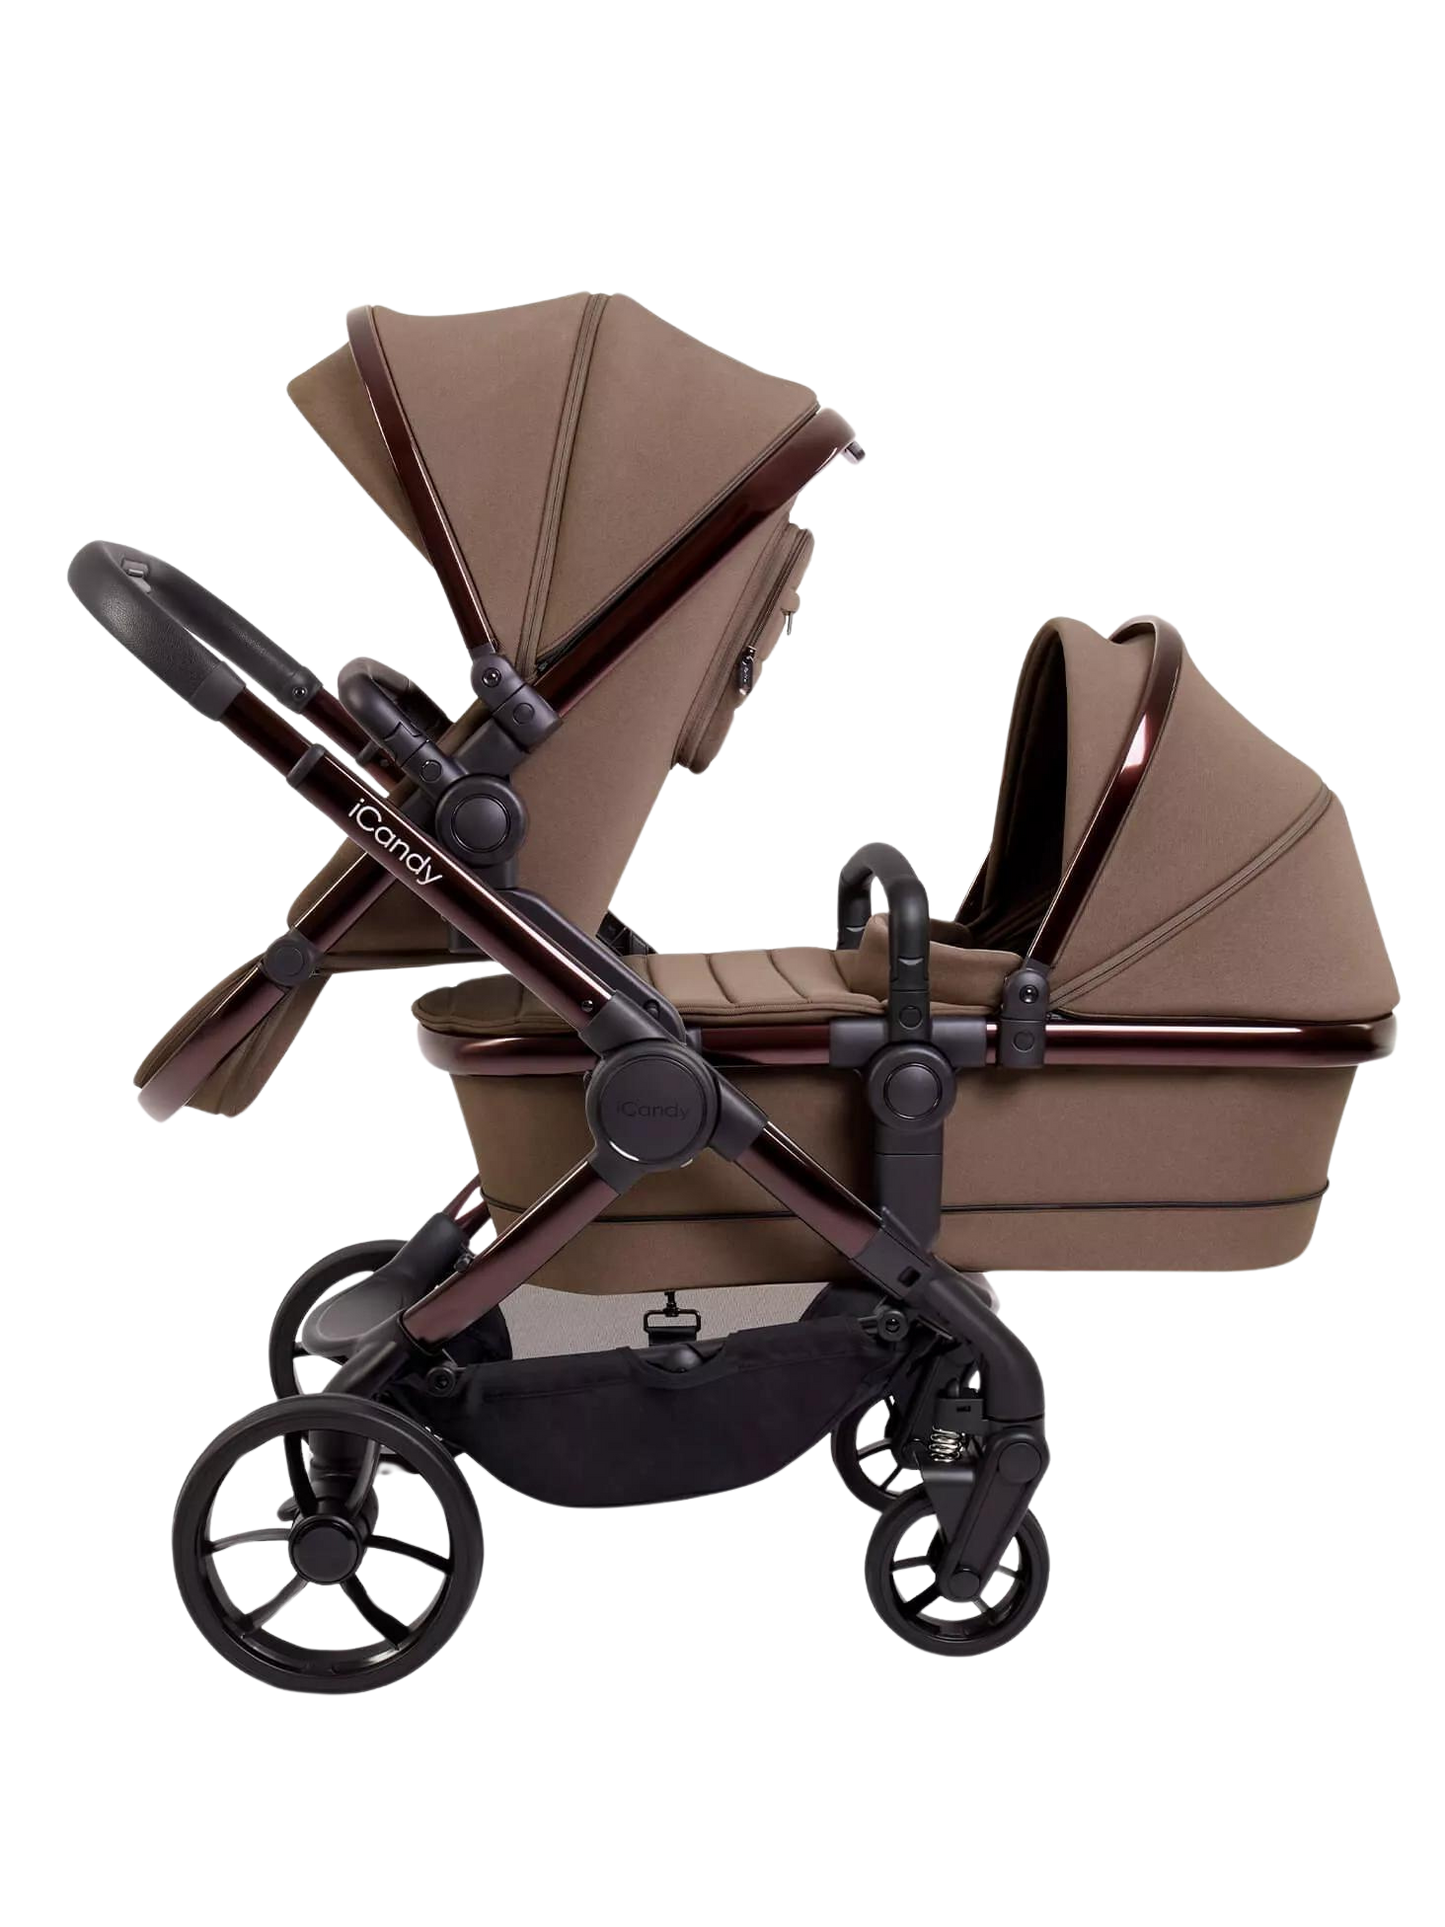 iCandy Peach 7 Double Stroller and Bassinet - Coco